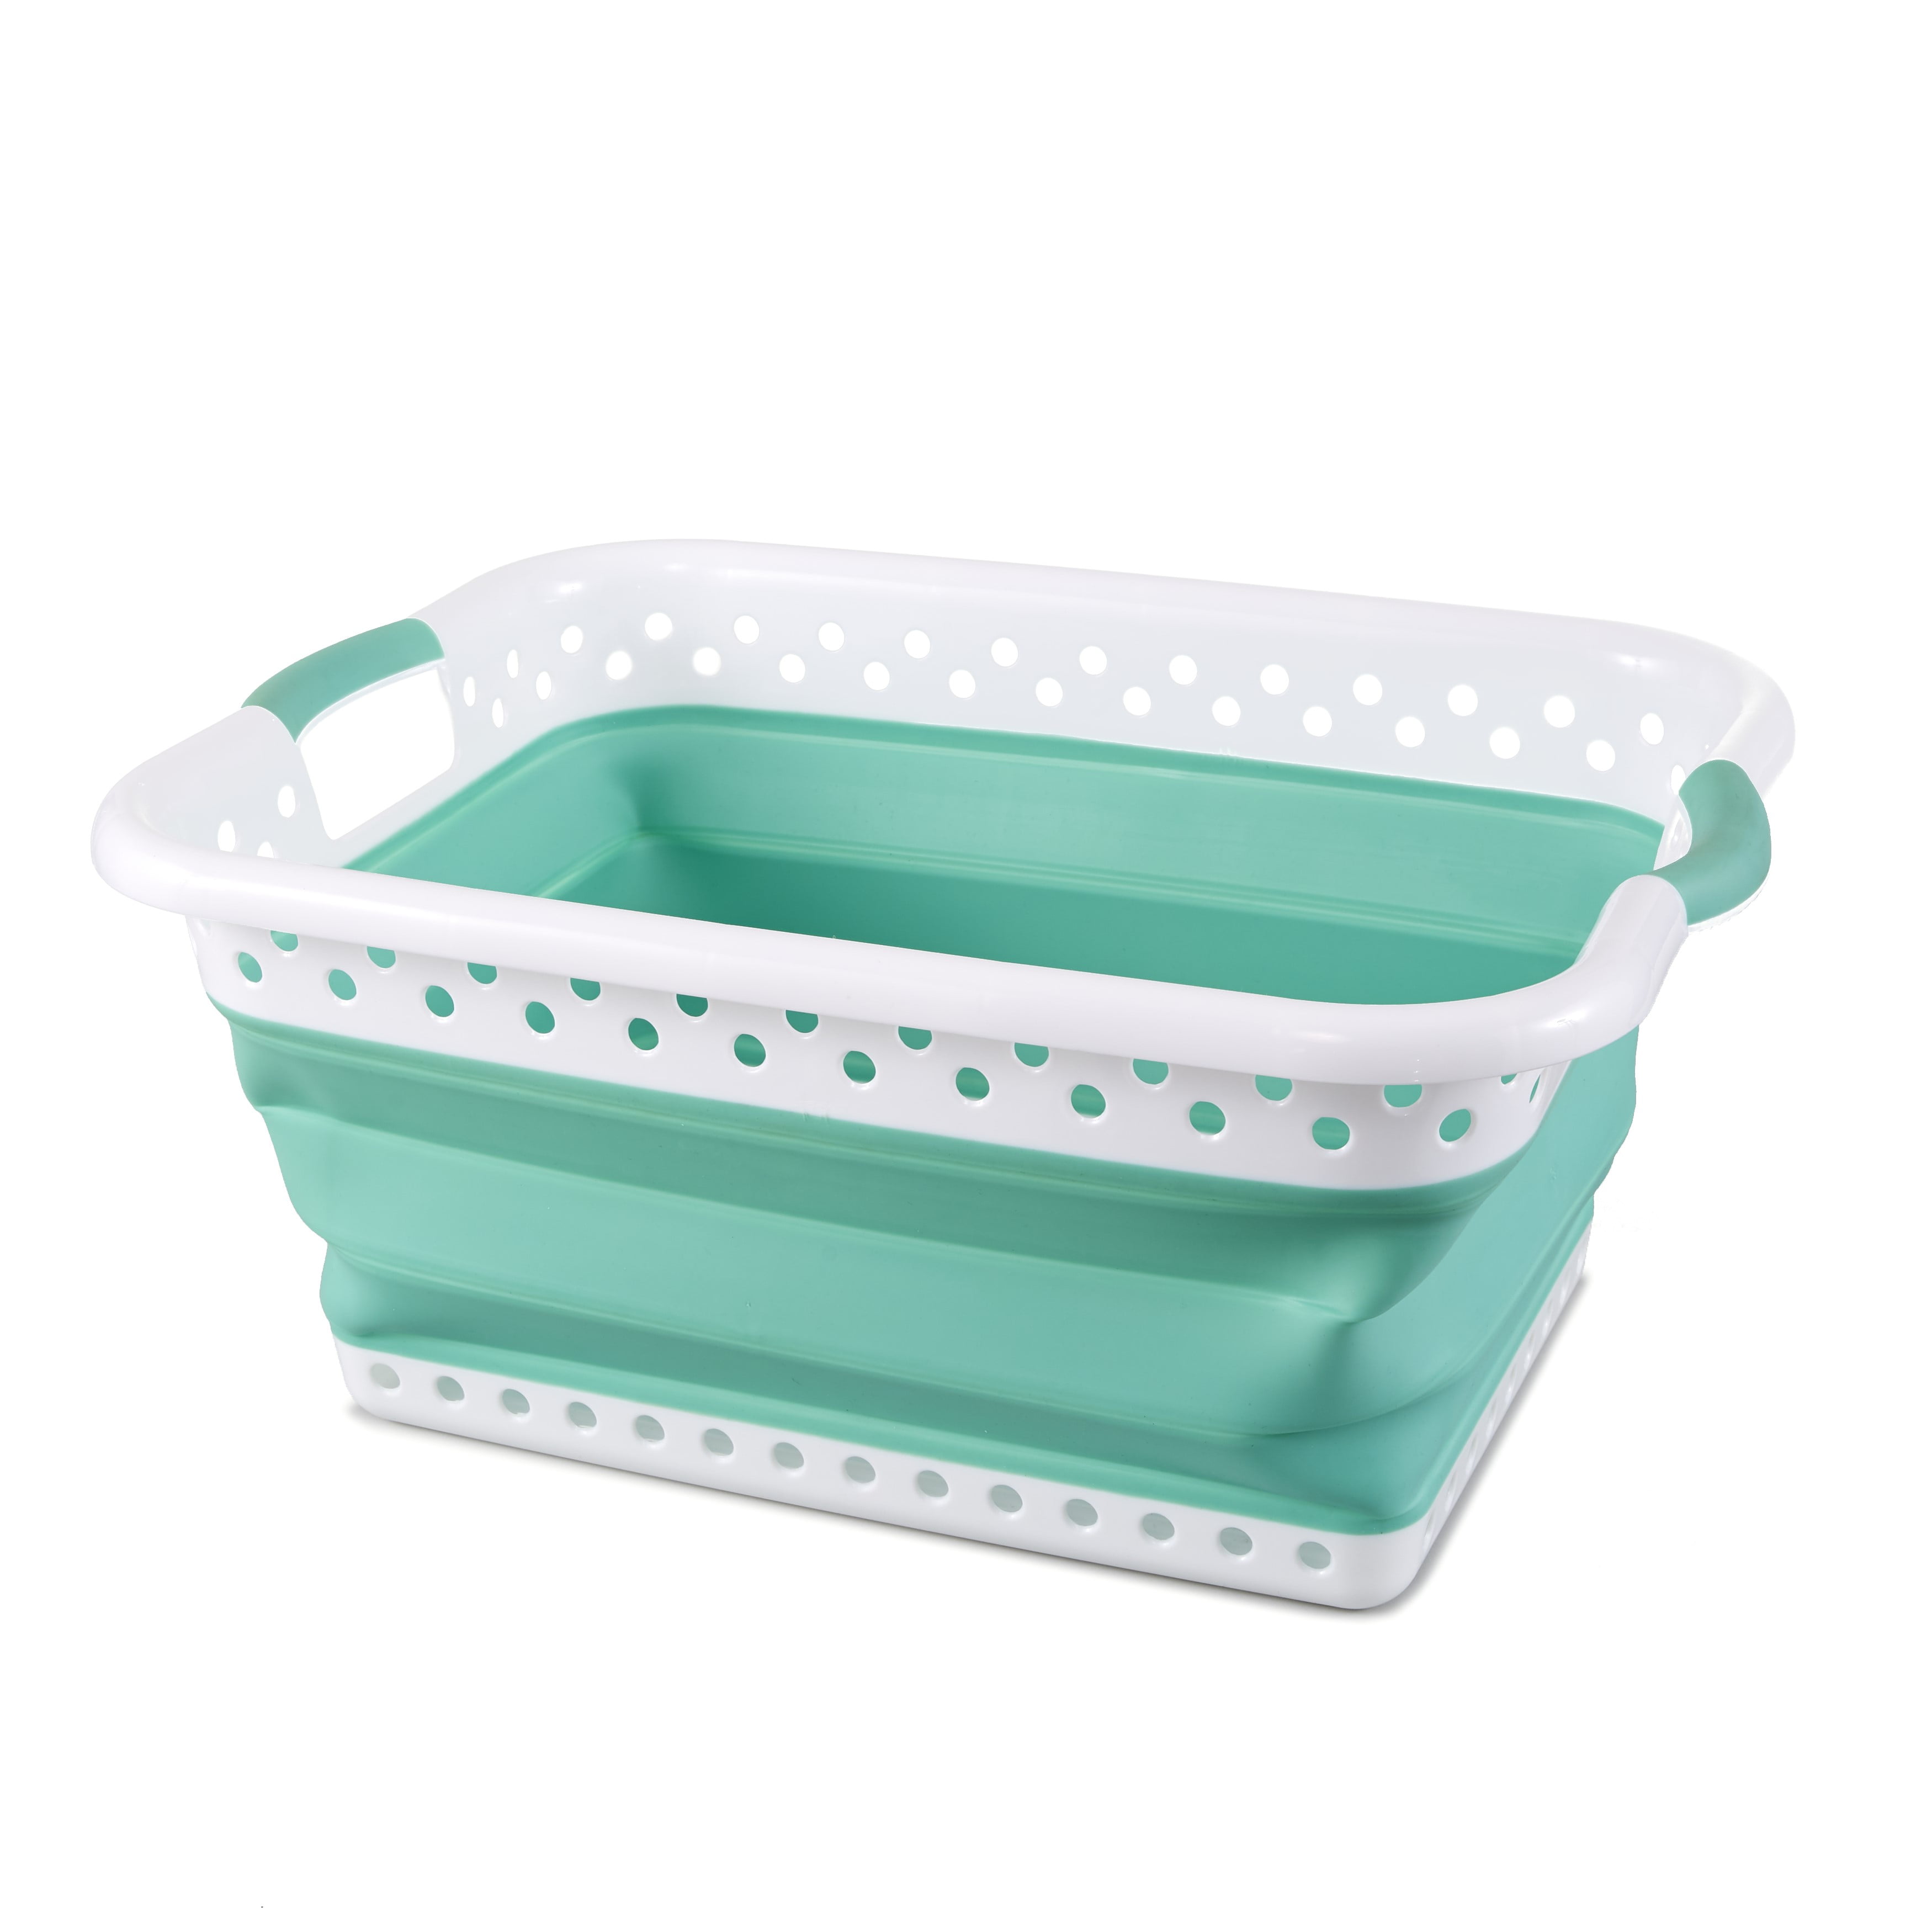 Silicone Collapsible Laundry Basket 25L - Practical and Durable